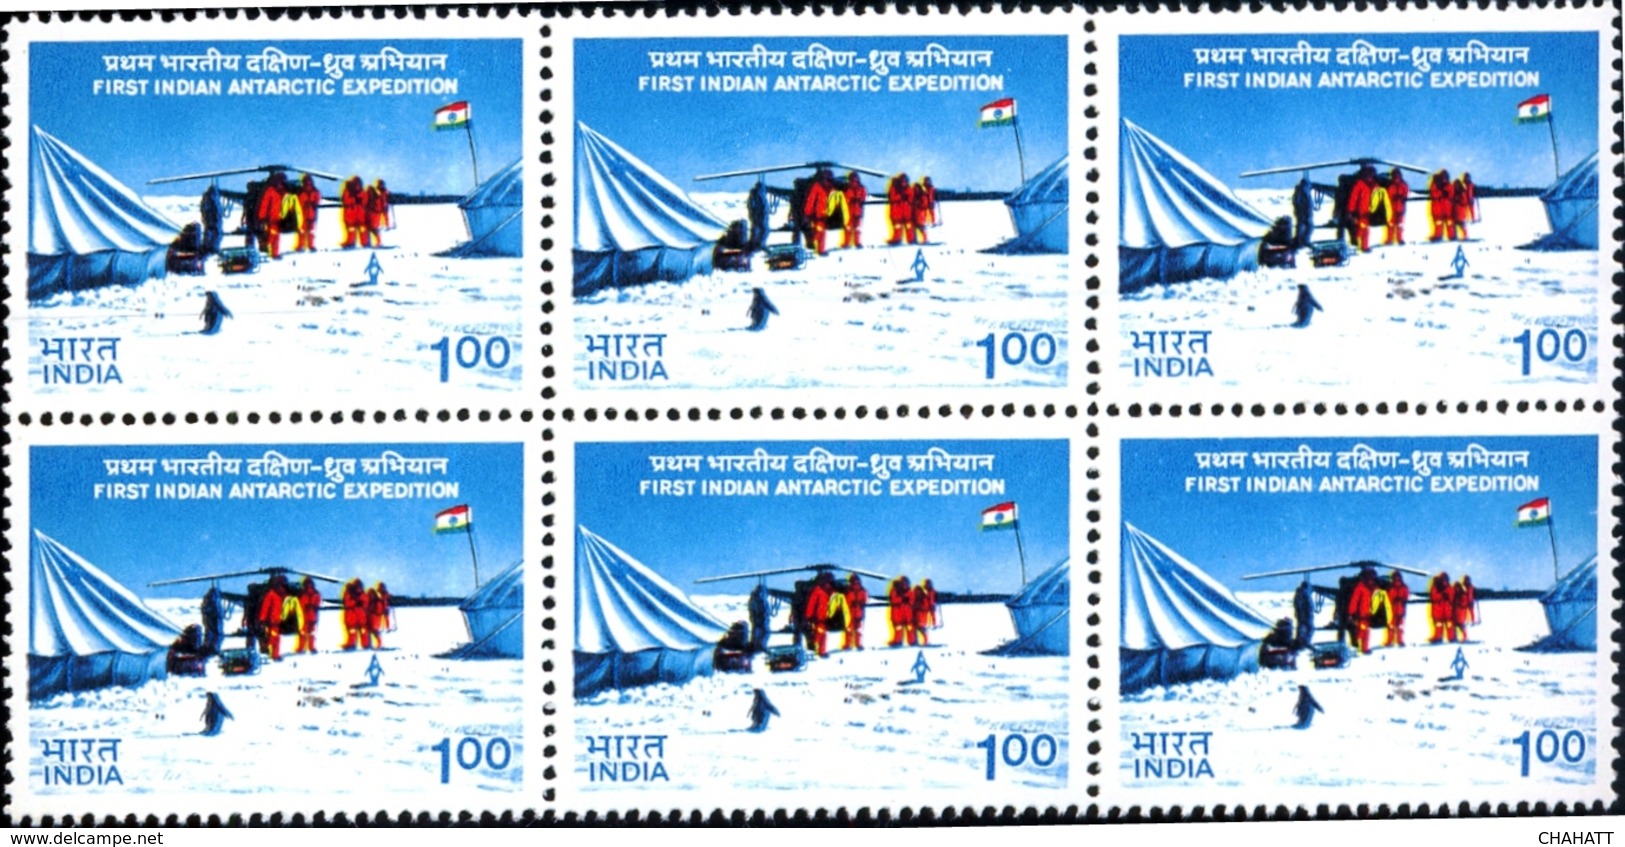 FIRST INDIAN ANTARCTIC EXPEDITION-PENGUINS-INDIAN FLAG-HELICOPTERS-ERROR-BLOCK OF 6-INDIA-1990-RARE-MNH-B9-873 - Forschungsprogramme